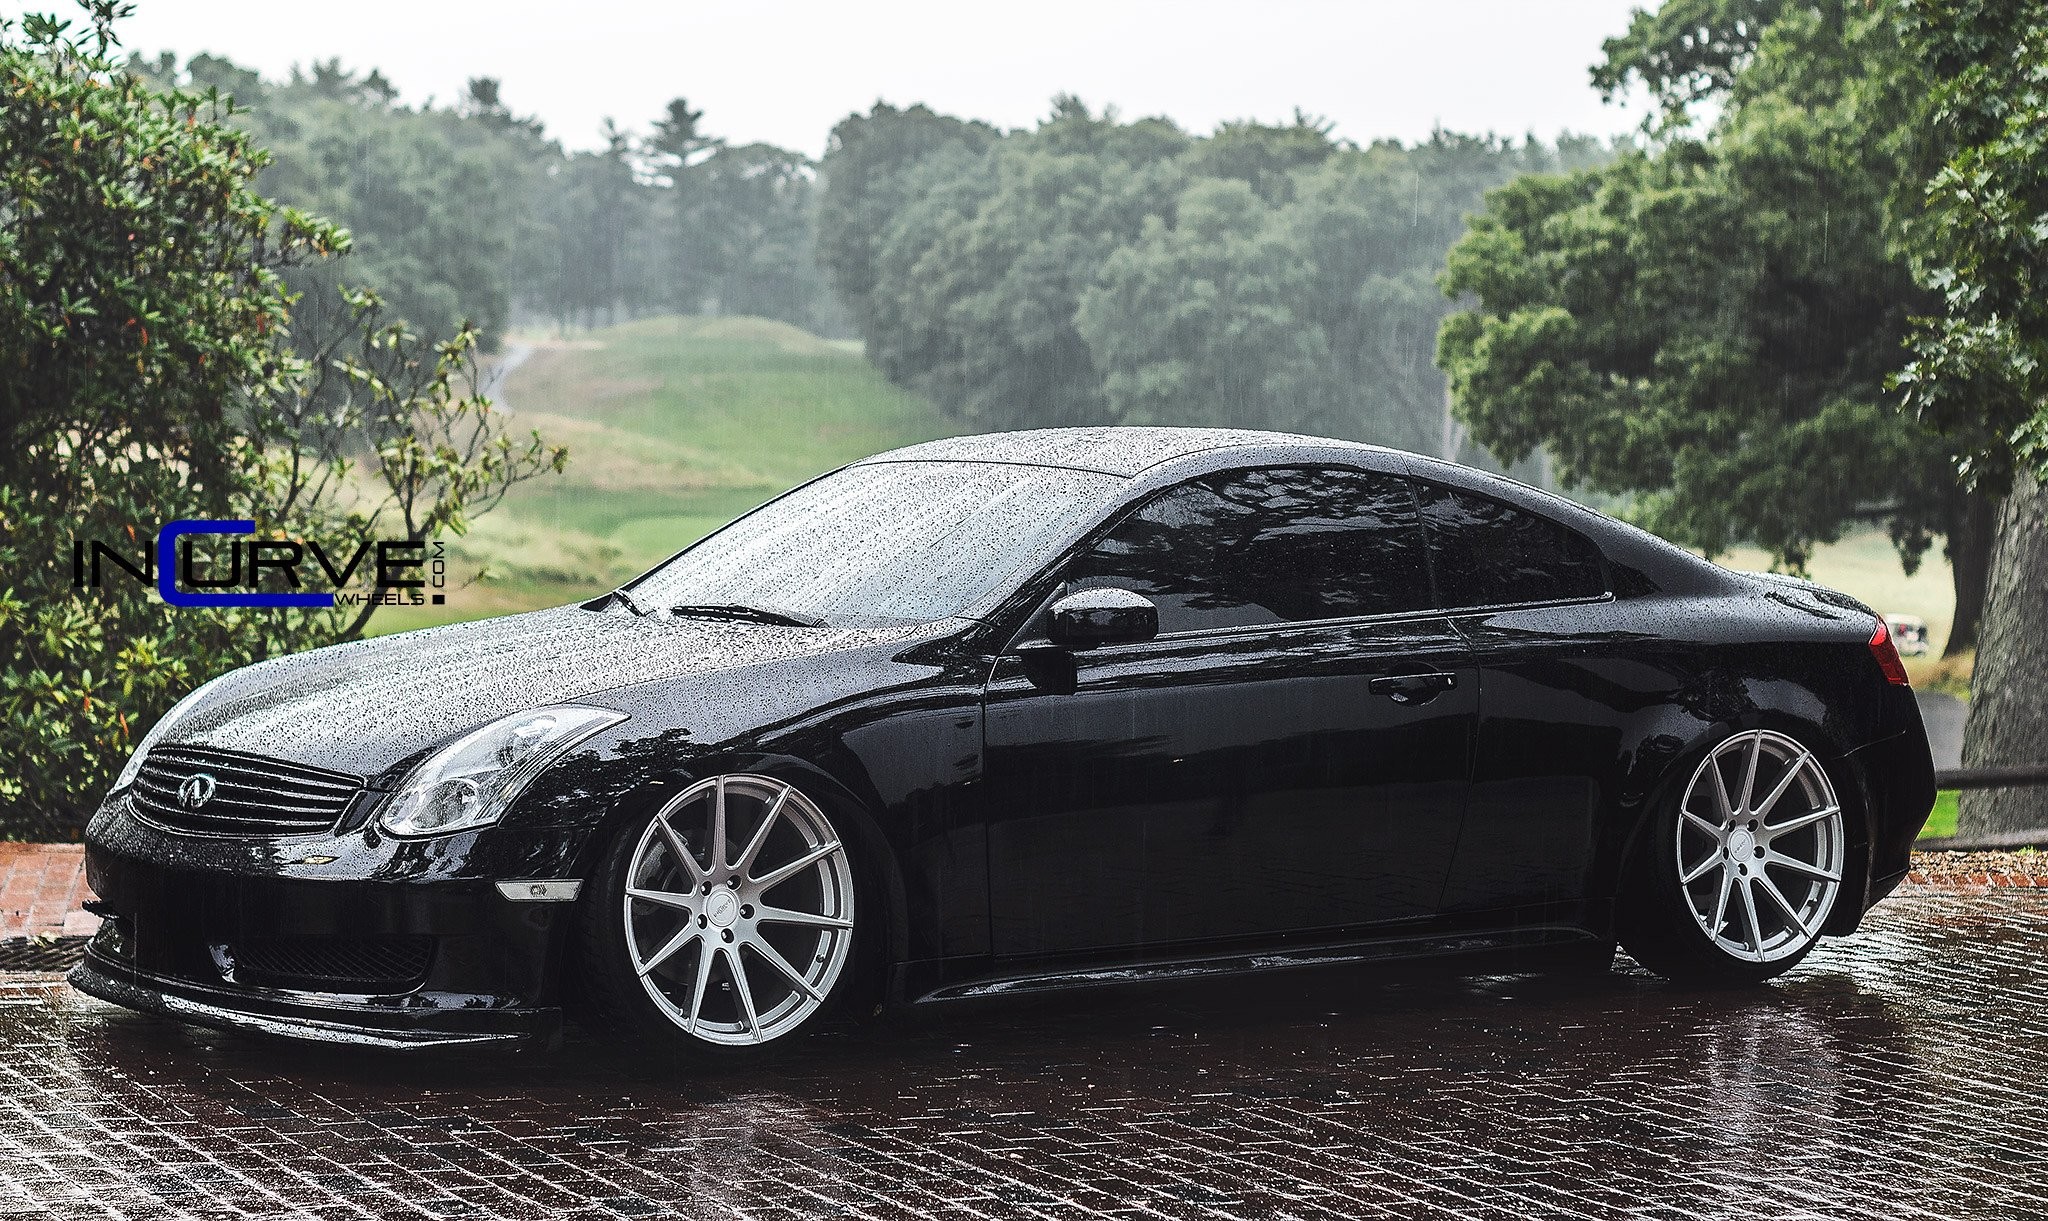 2015 Incurve Wheels cars tuning Infiniti G35 coupe wallpaper